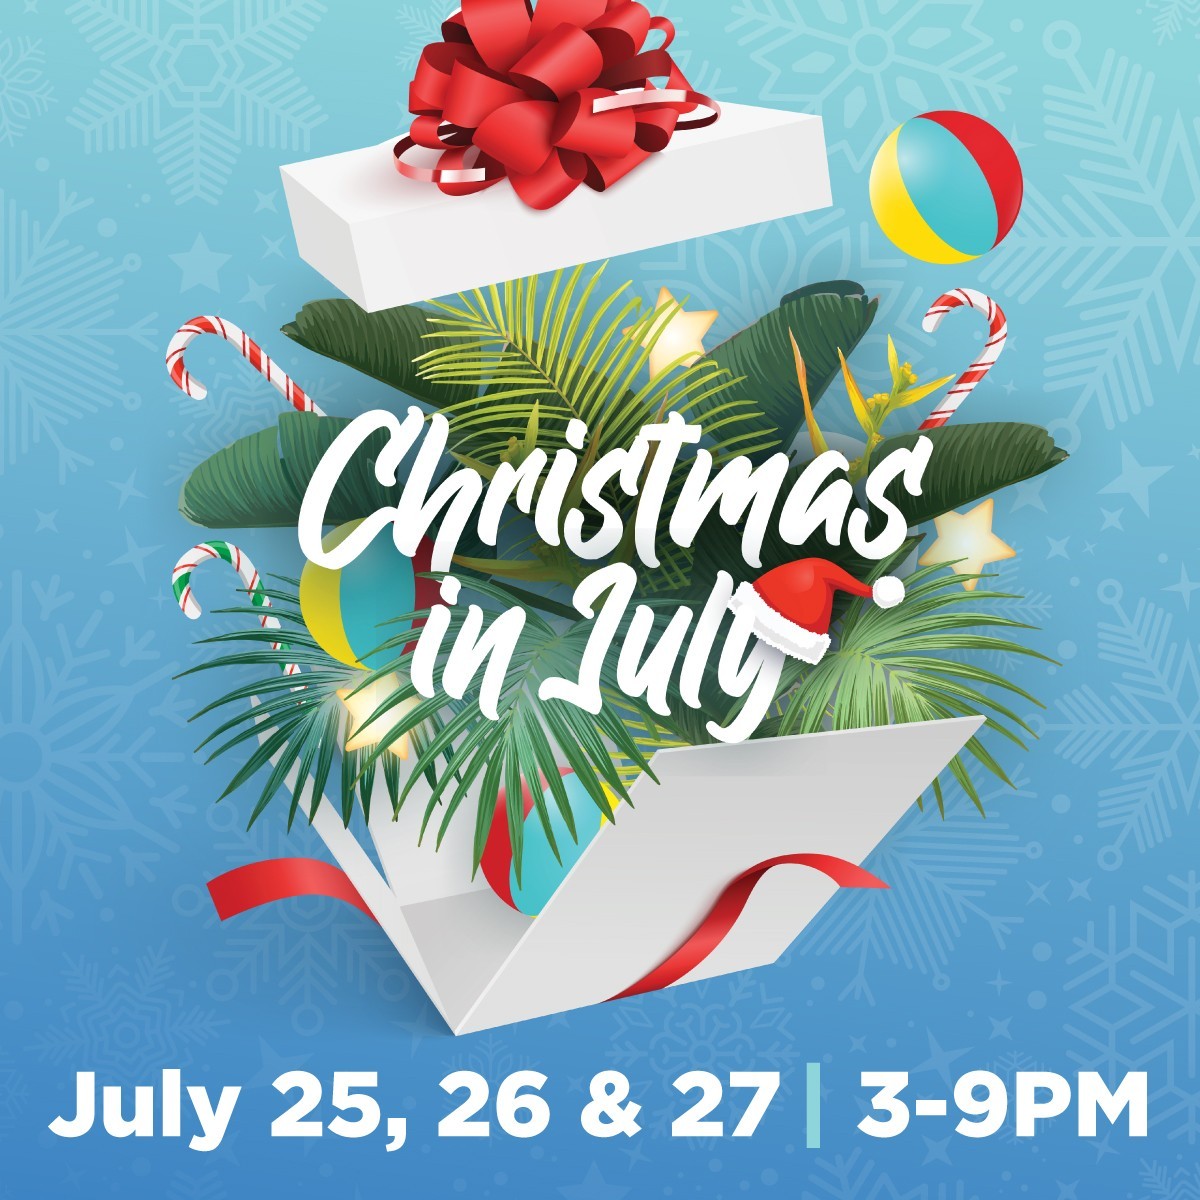 christmas in july at jenkinsons boardwalk july 25 26 and 27 from 3-9pm each day